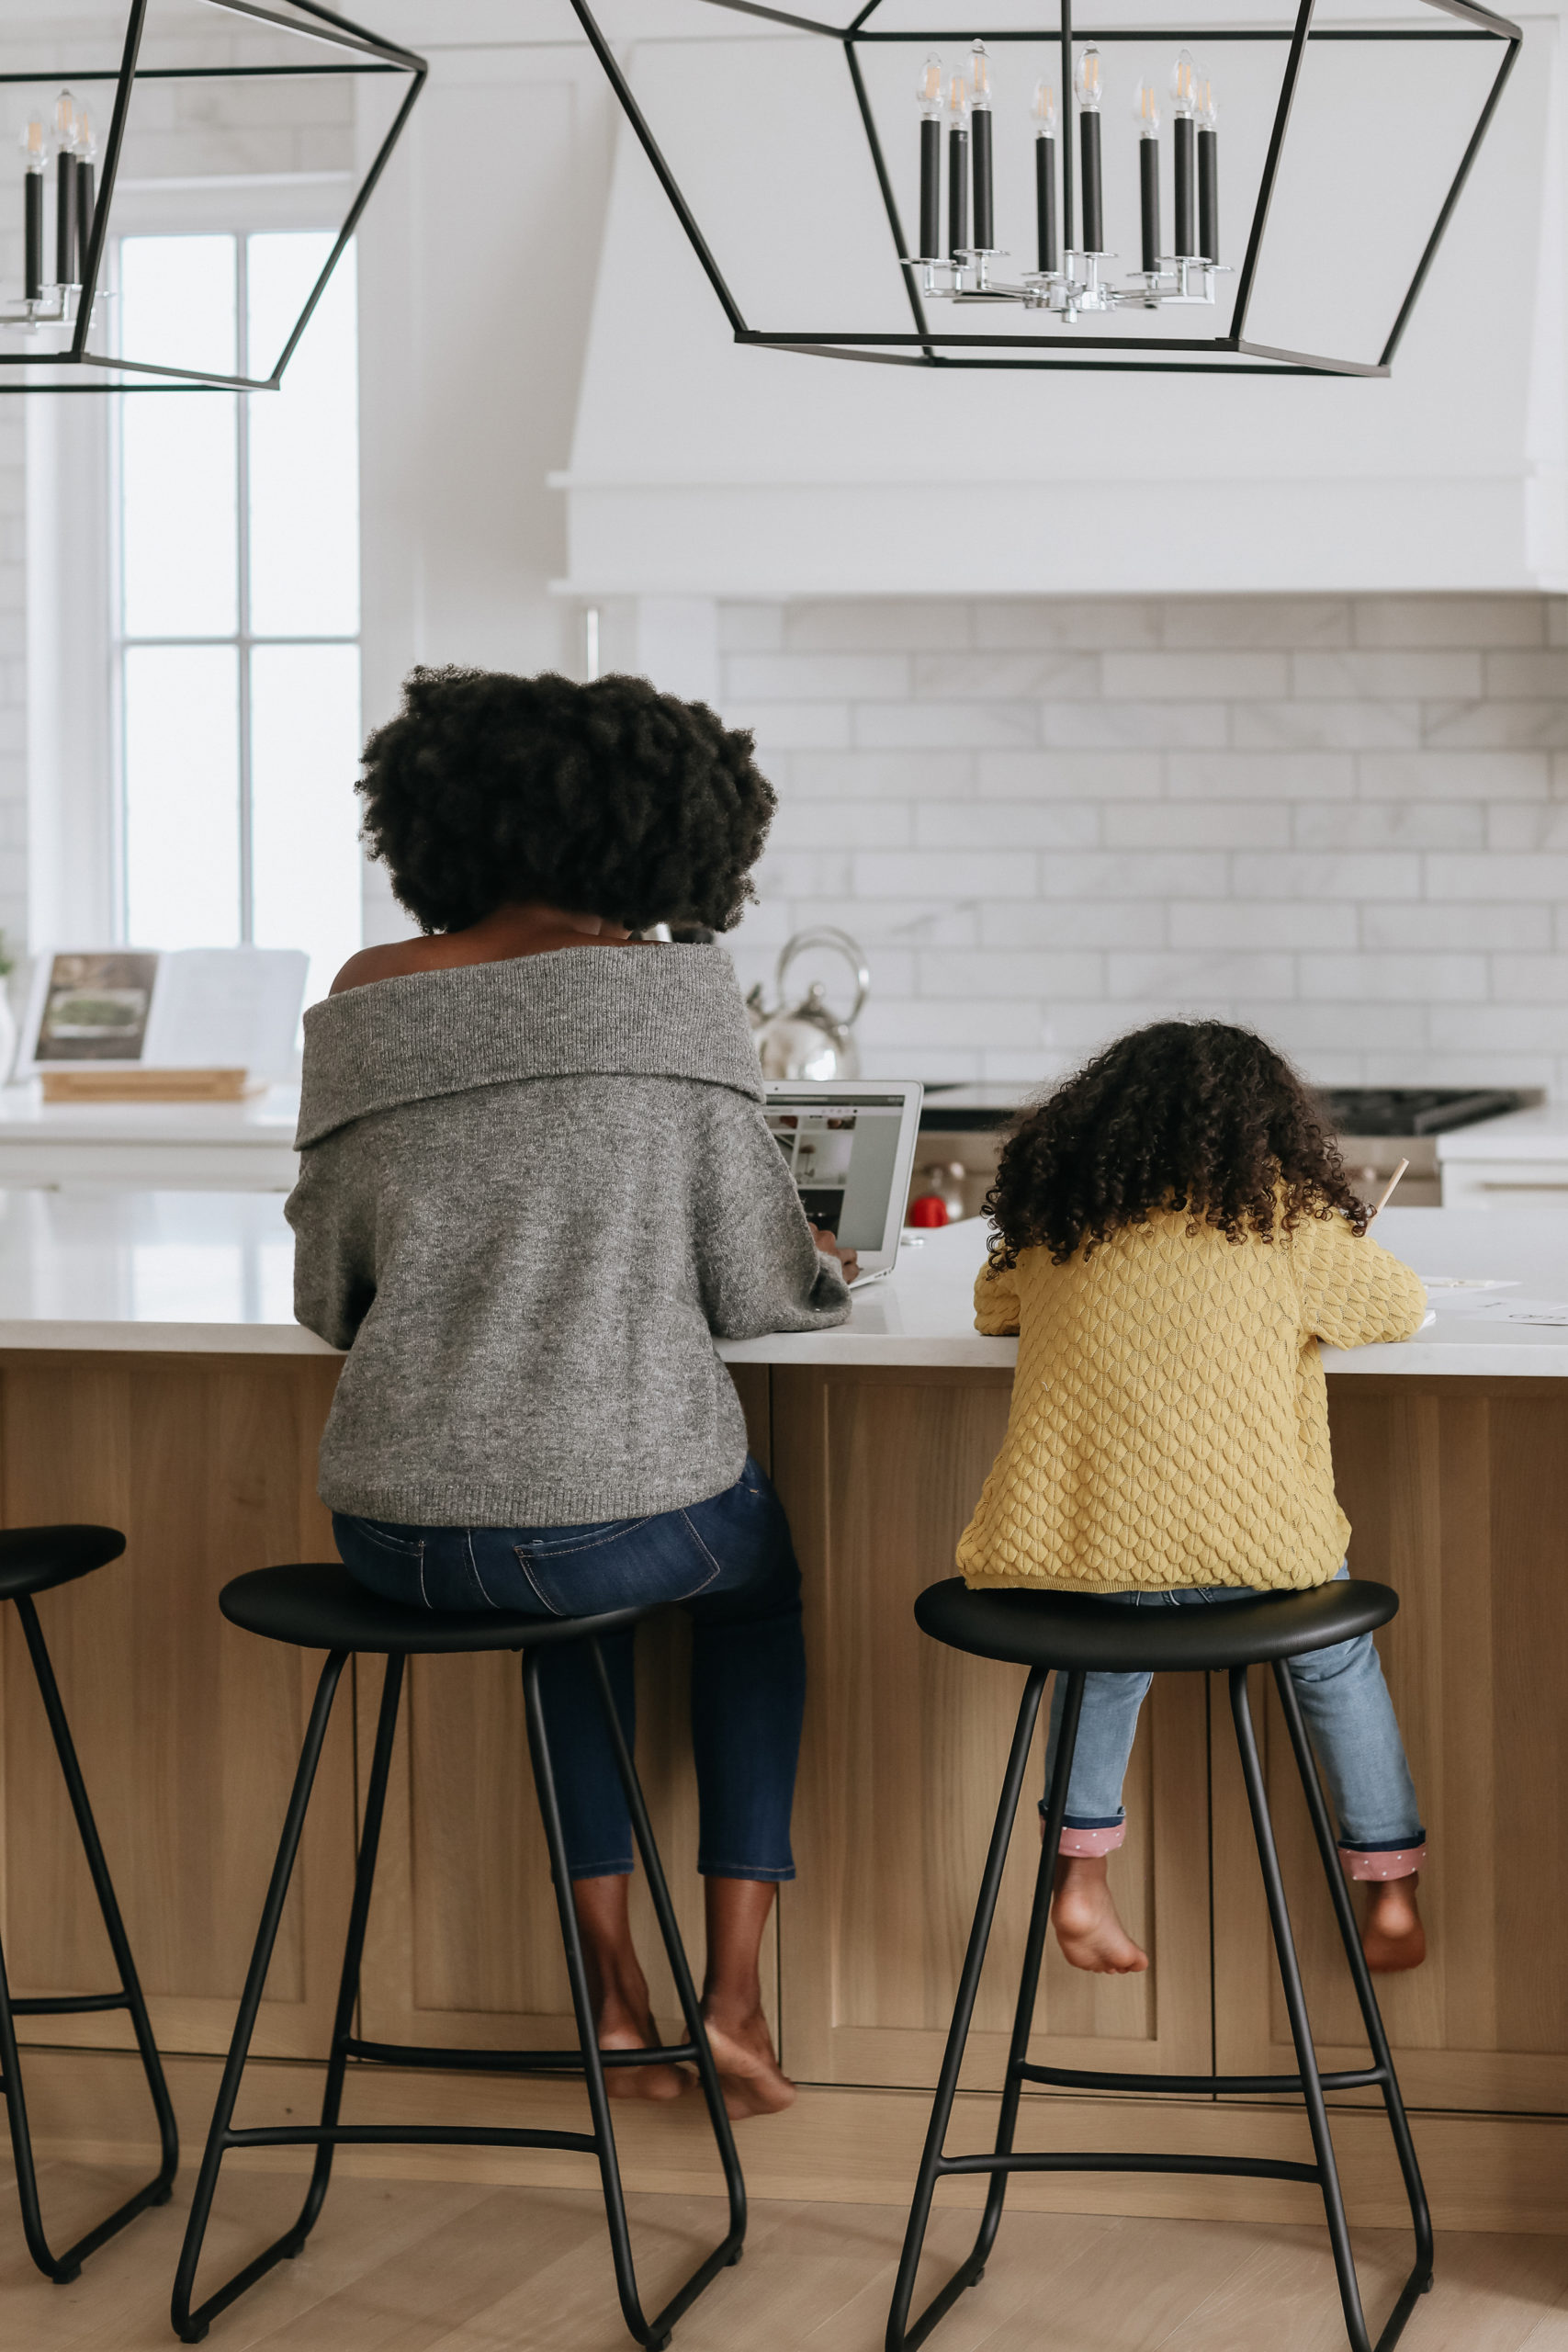 Tips from working moms about how to have help in your home, business, and with your kids on the Breakthrough Brand Podcast with host Elizabeth McCravy and special guests.